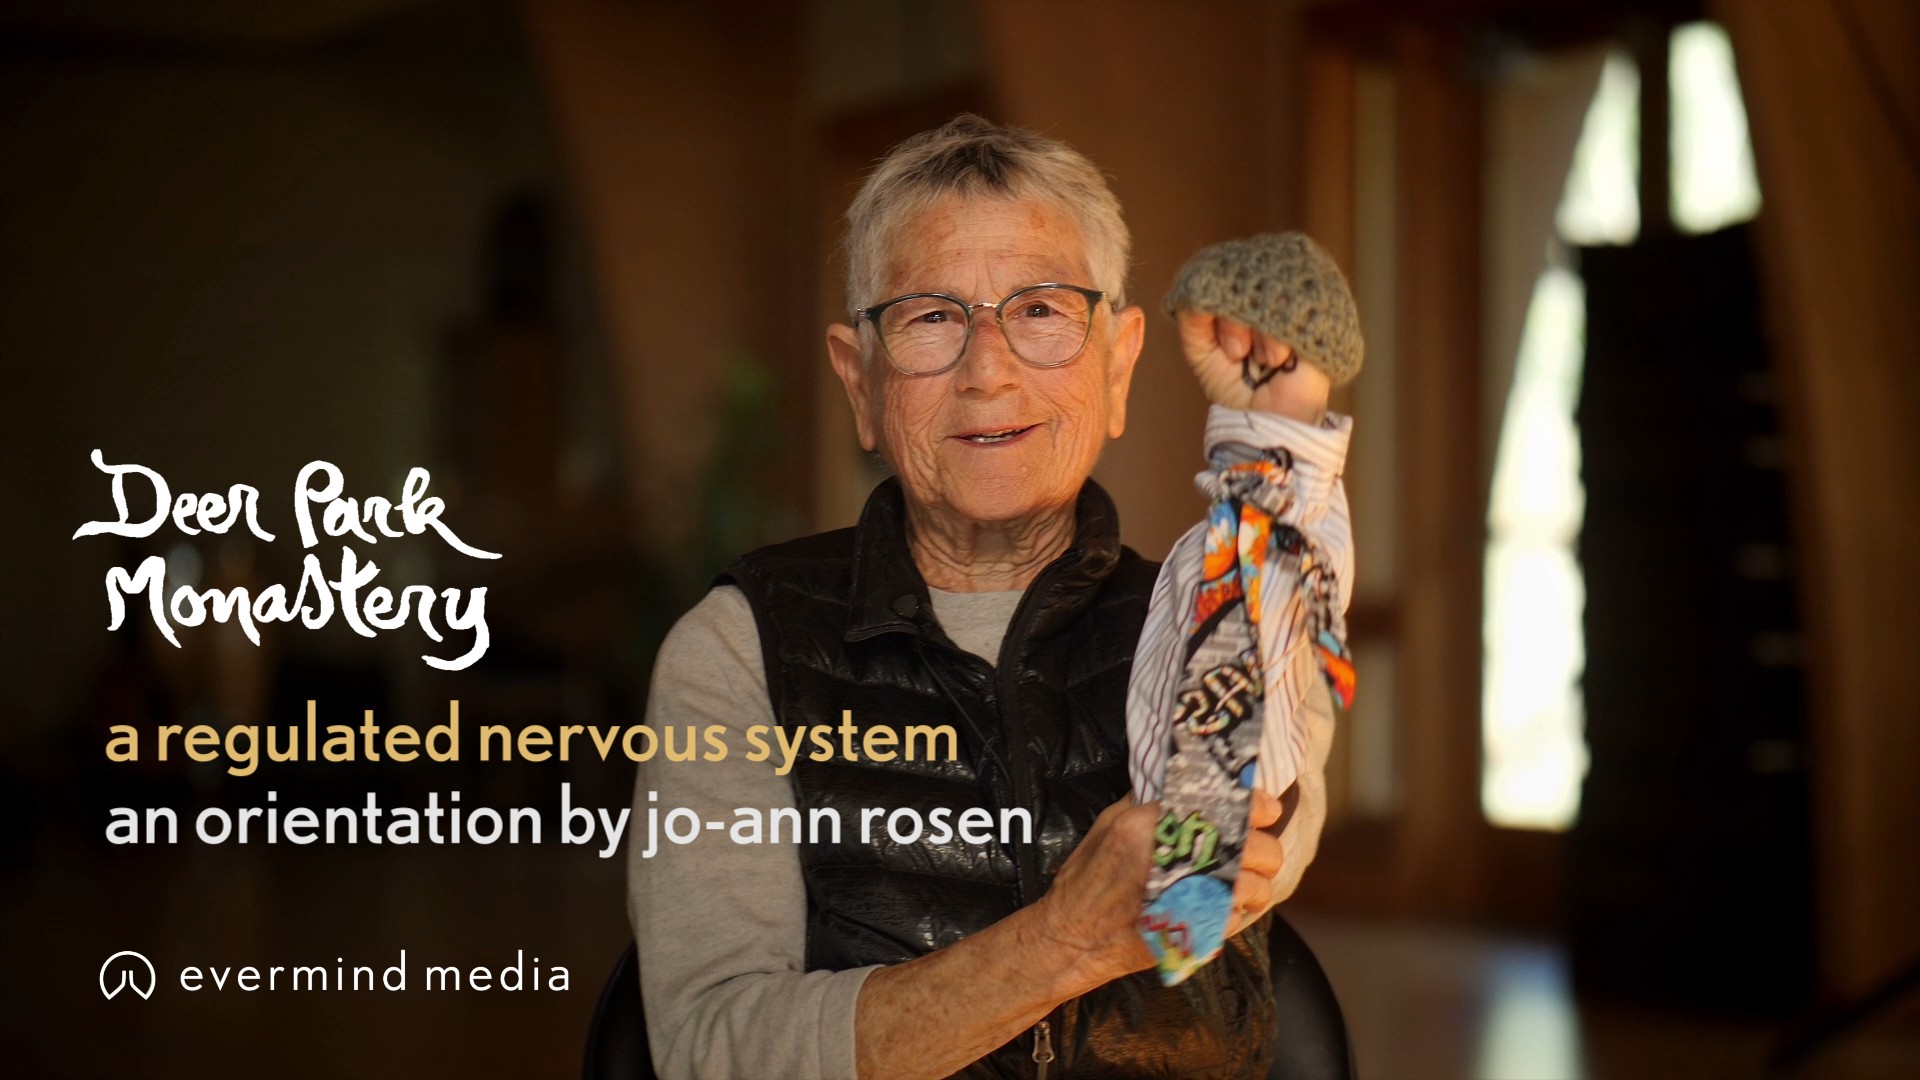 A Well-Regulated Nervous System